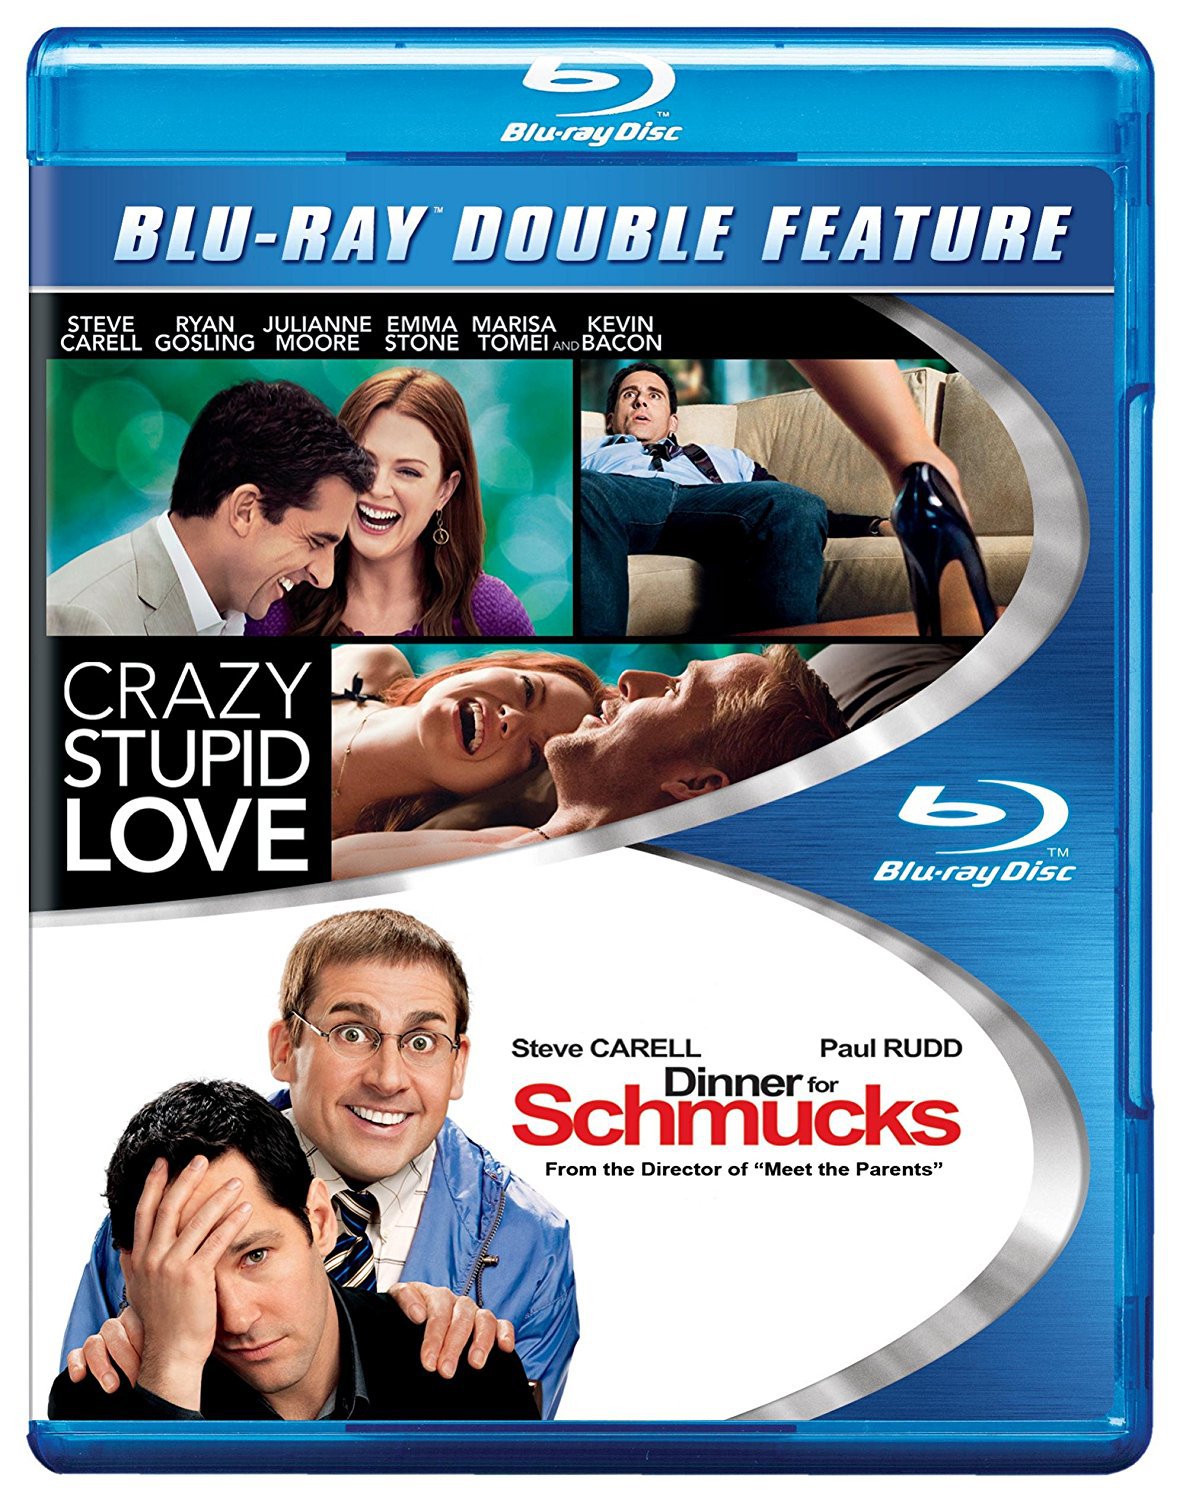 Blu-Ray Double Feature